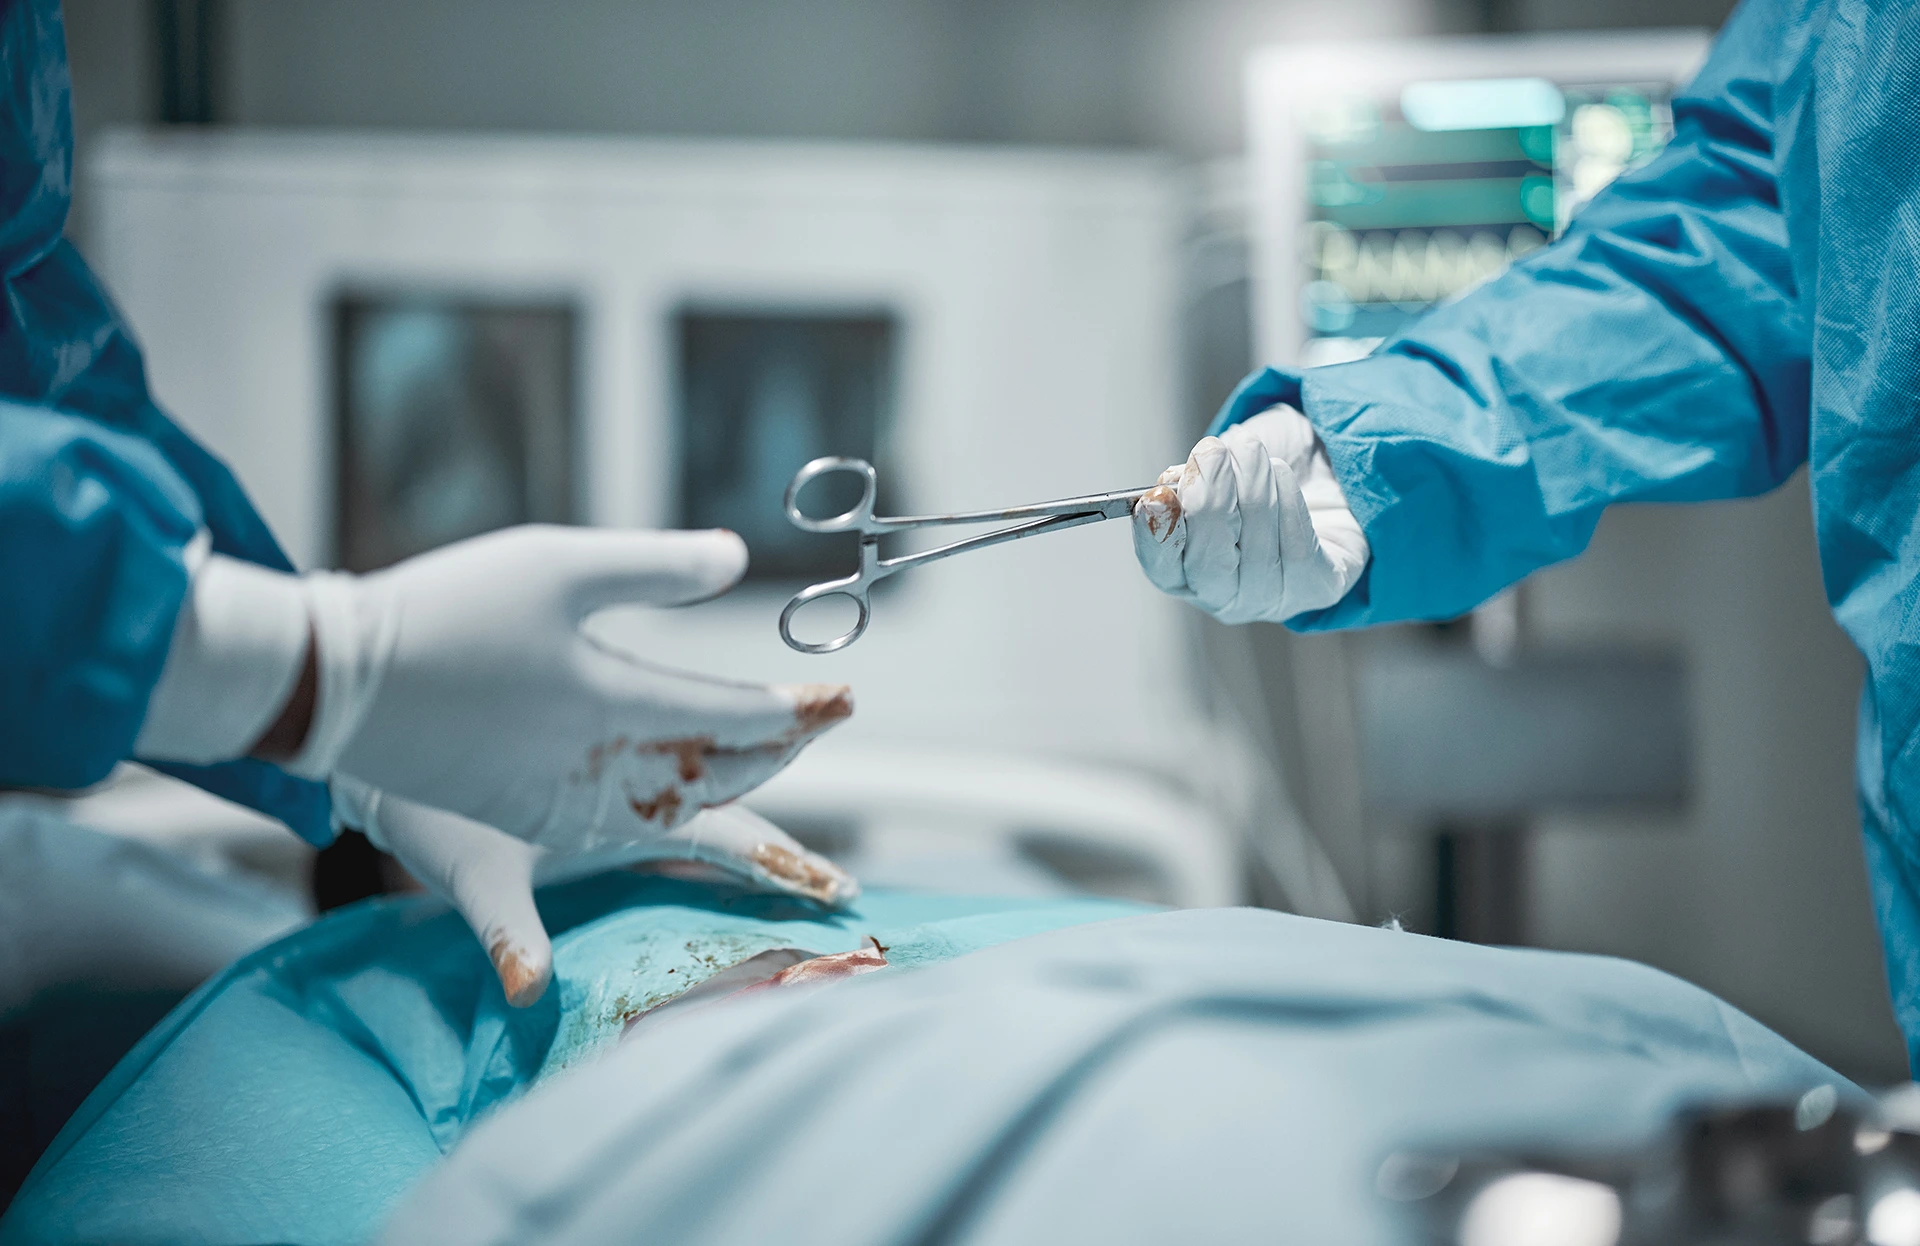 Two surgeons are working on a patient in an operating room.